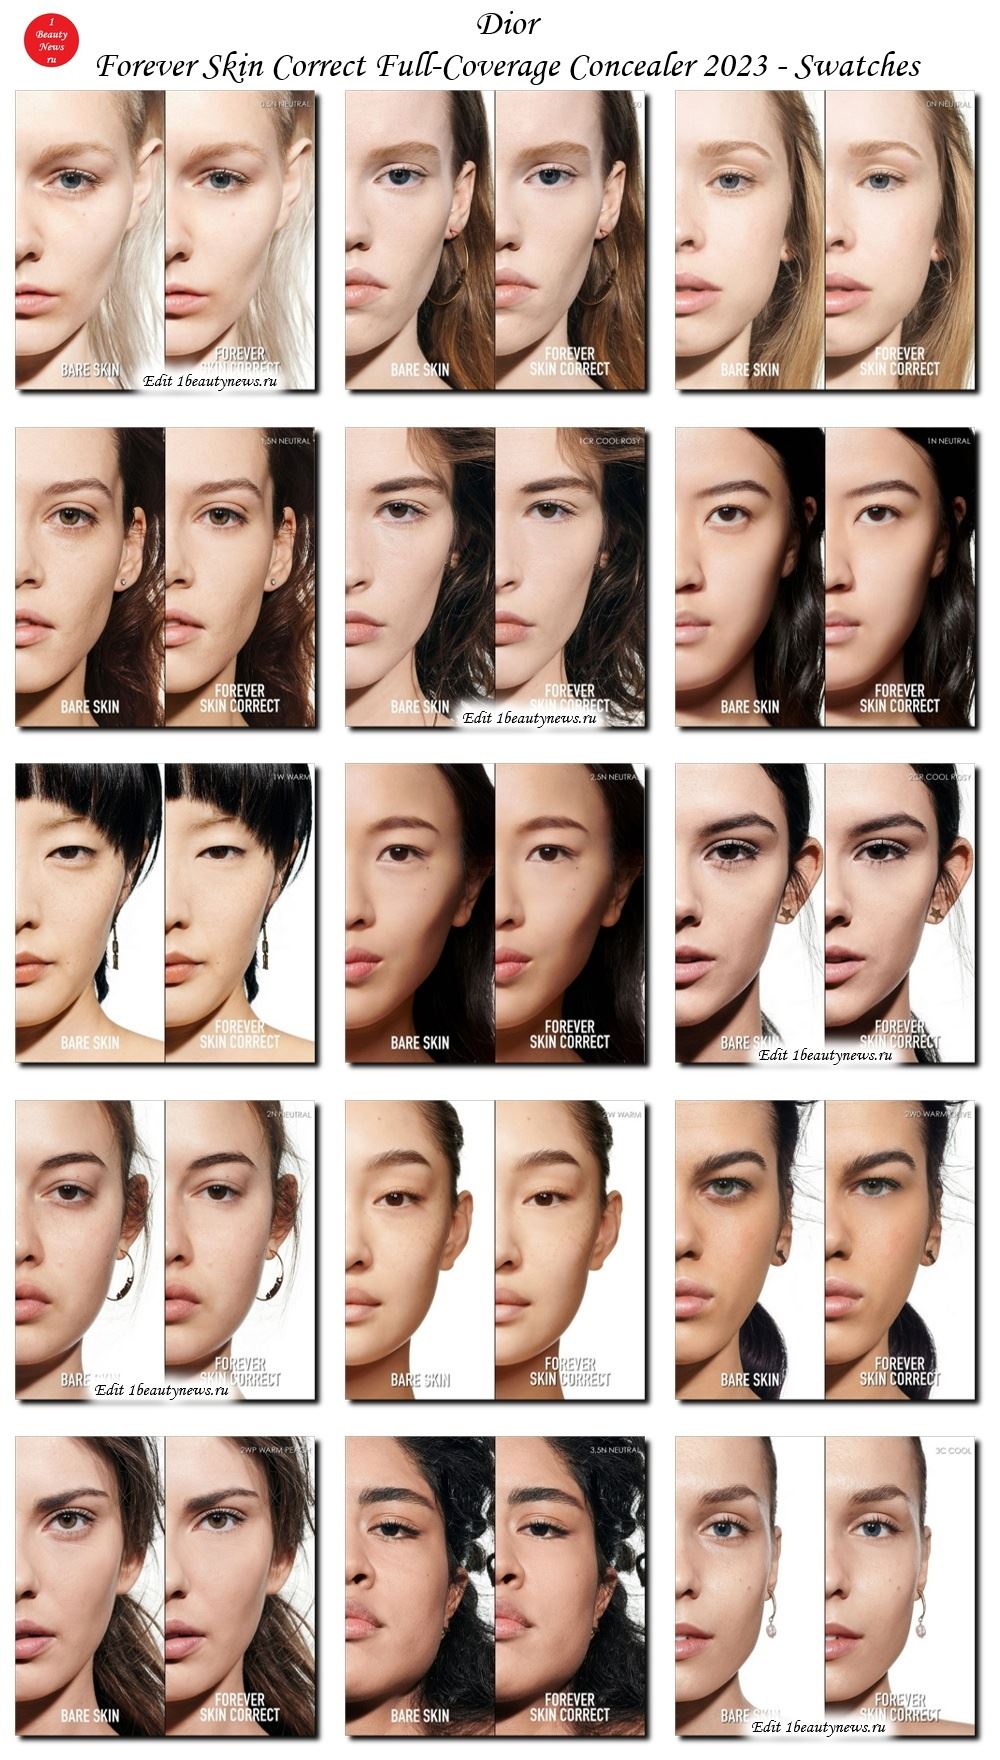 Dior Forever Skin Correct Full-Coverage Concealer 2023 - Swatches